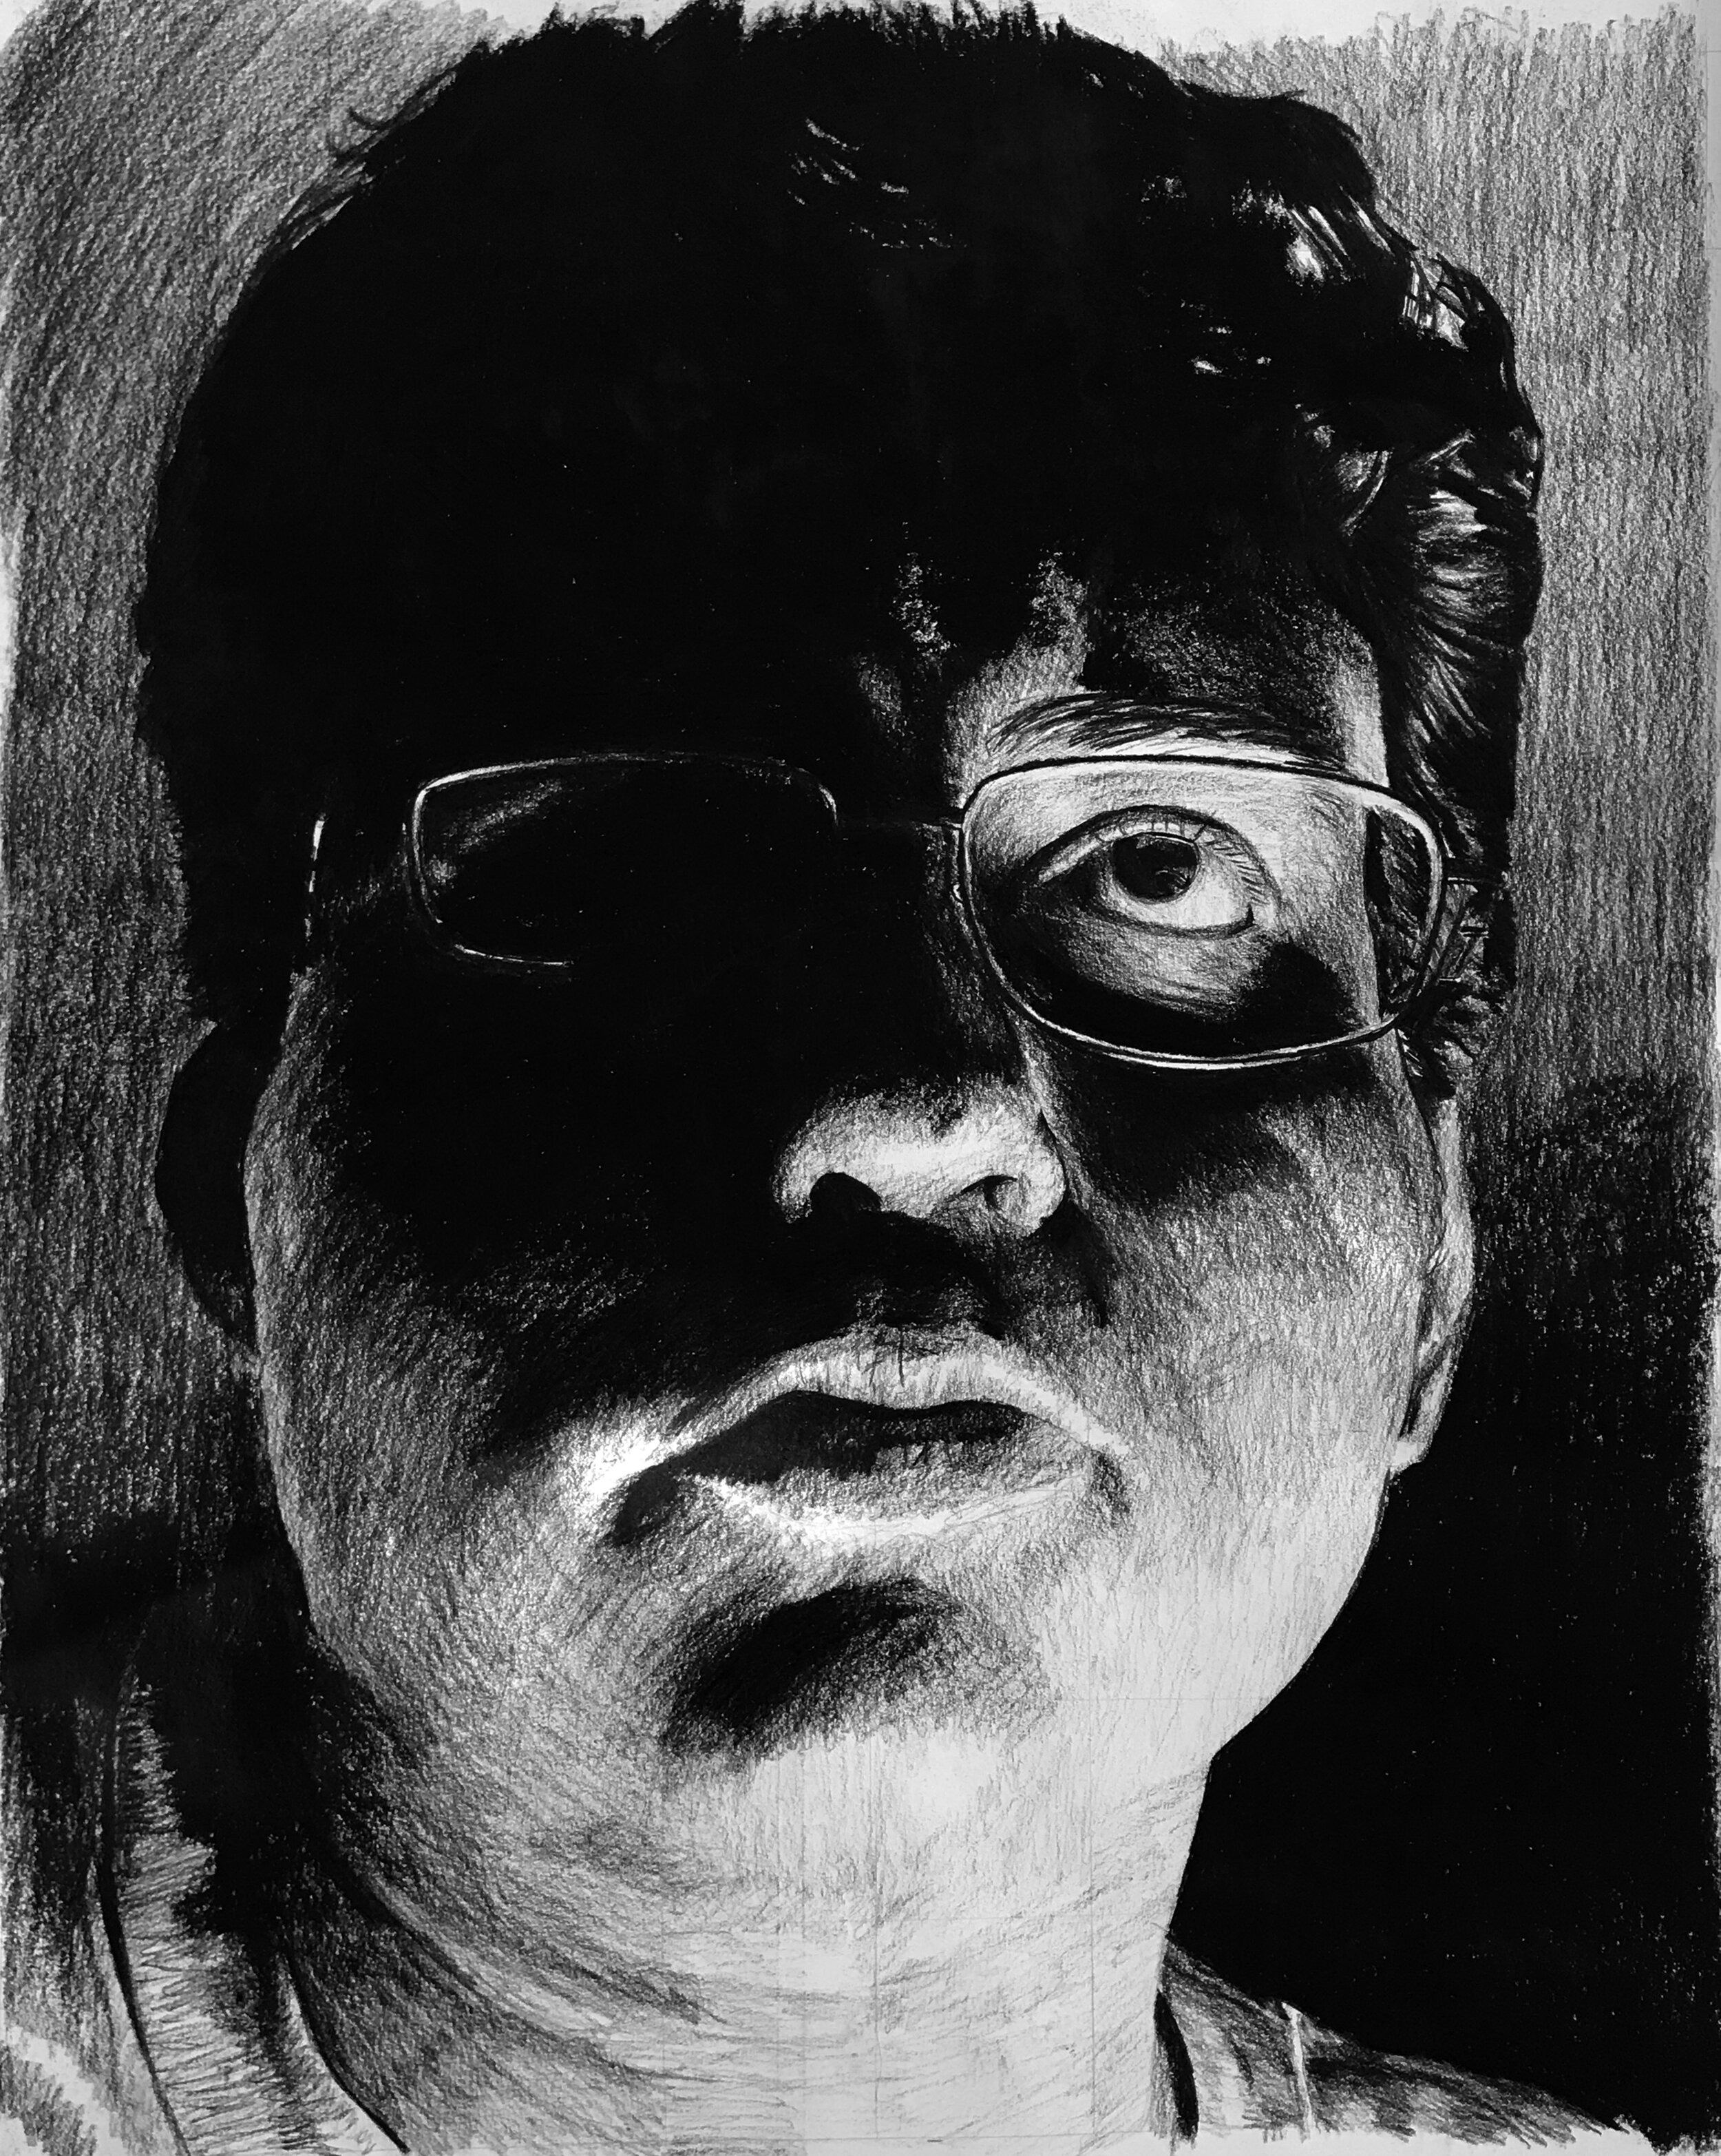  Alex Ramirez,  Self Portrait , Charcoal on paper, 16 by 20 inches. University of New Haven, Spring 2018, ARTS 1105: Basic Drawing I.    